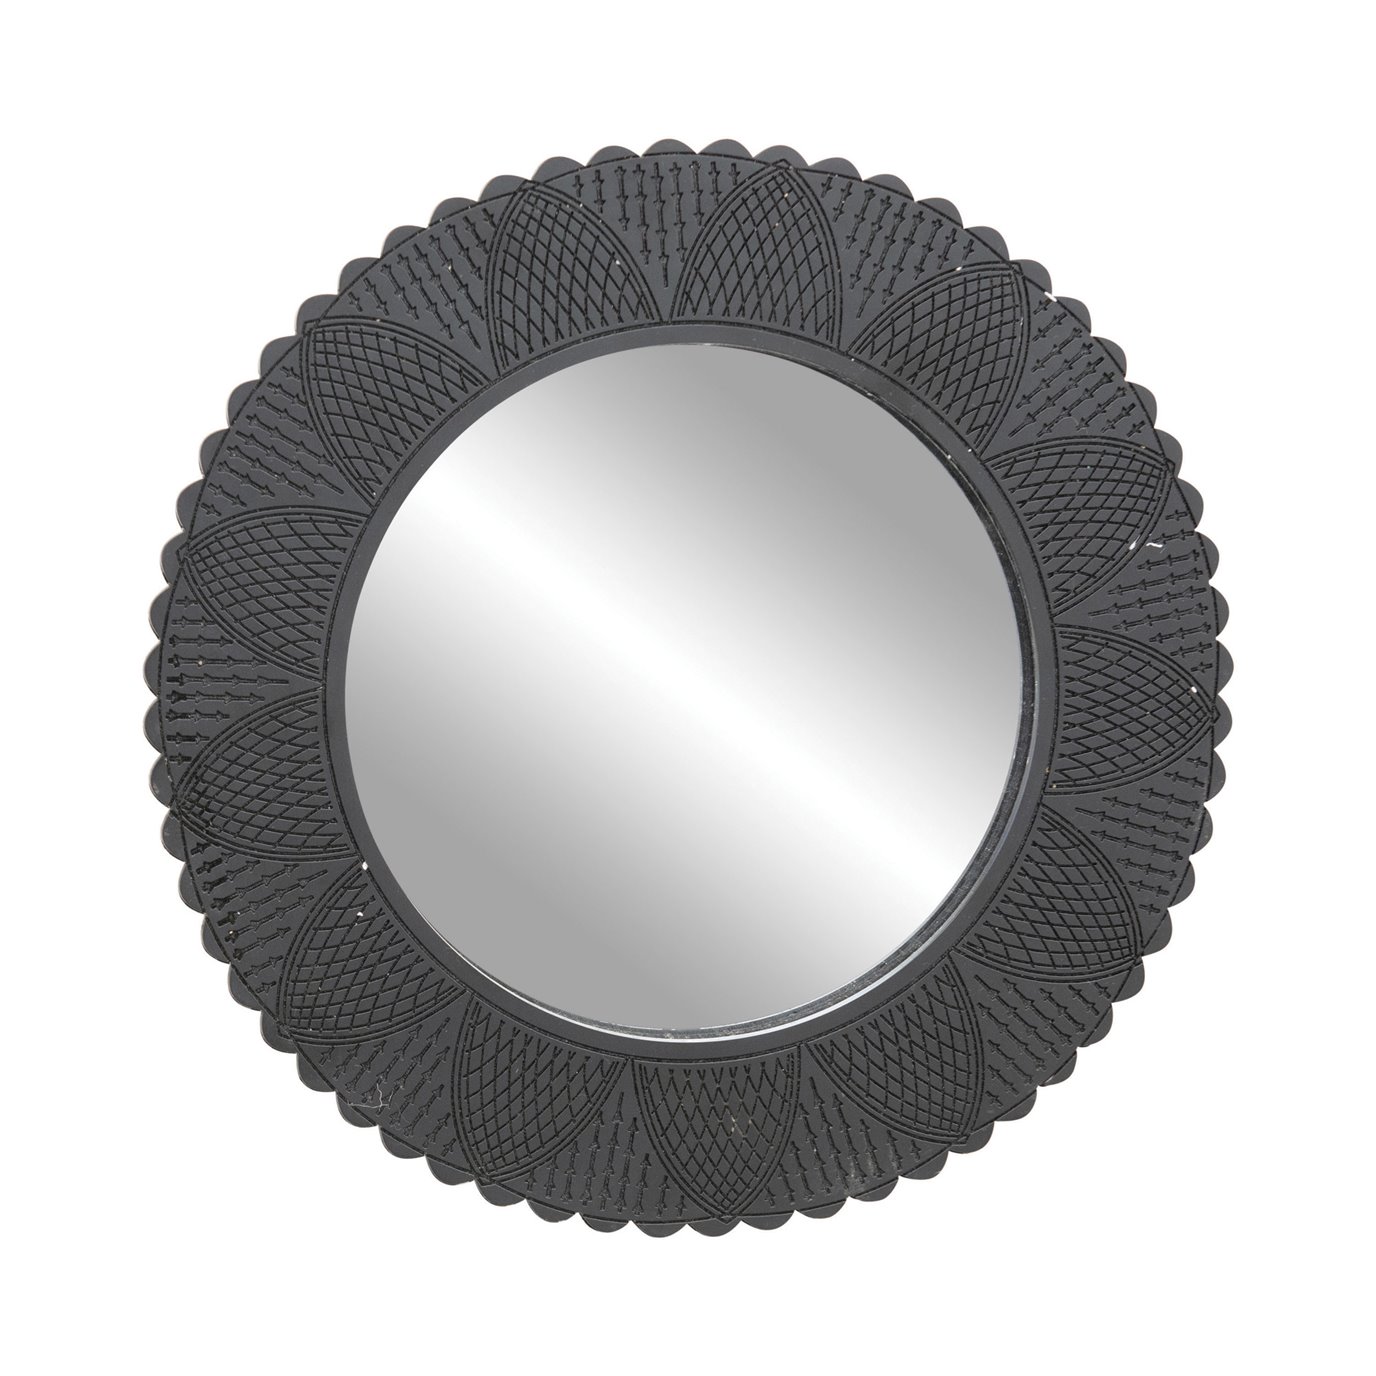 Hand-Carved Resin & MDF Wall Mirror with Cut-Outs & Scalloped Edge, Black (Holds 7" Round Photo)